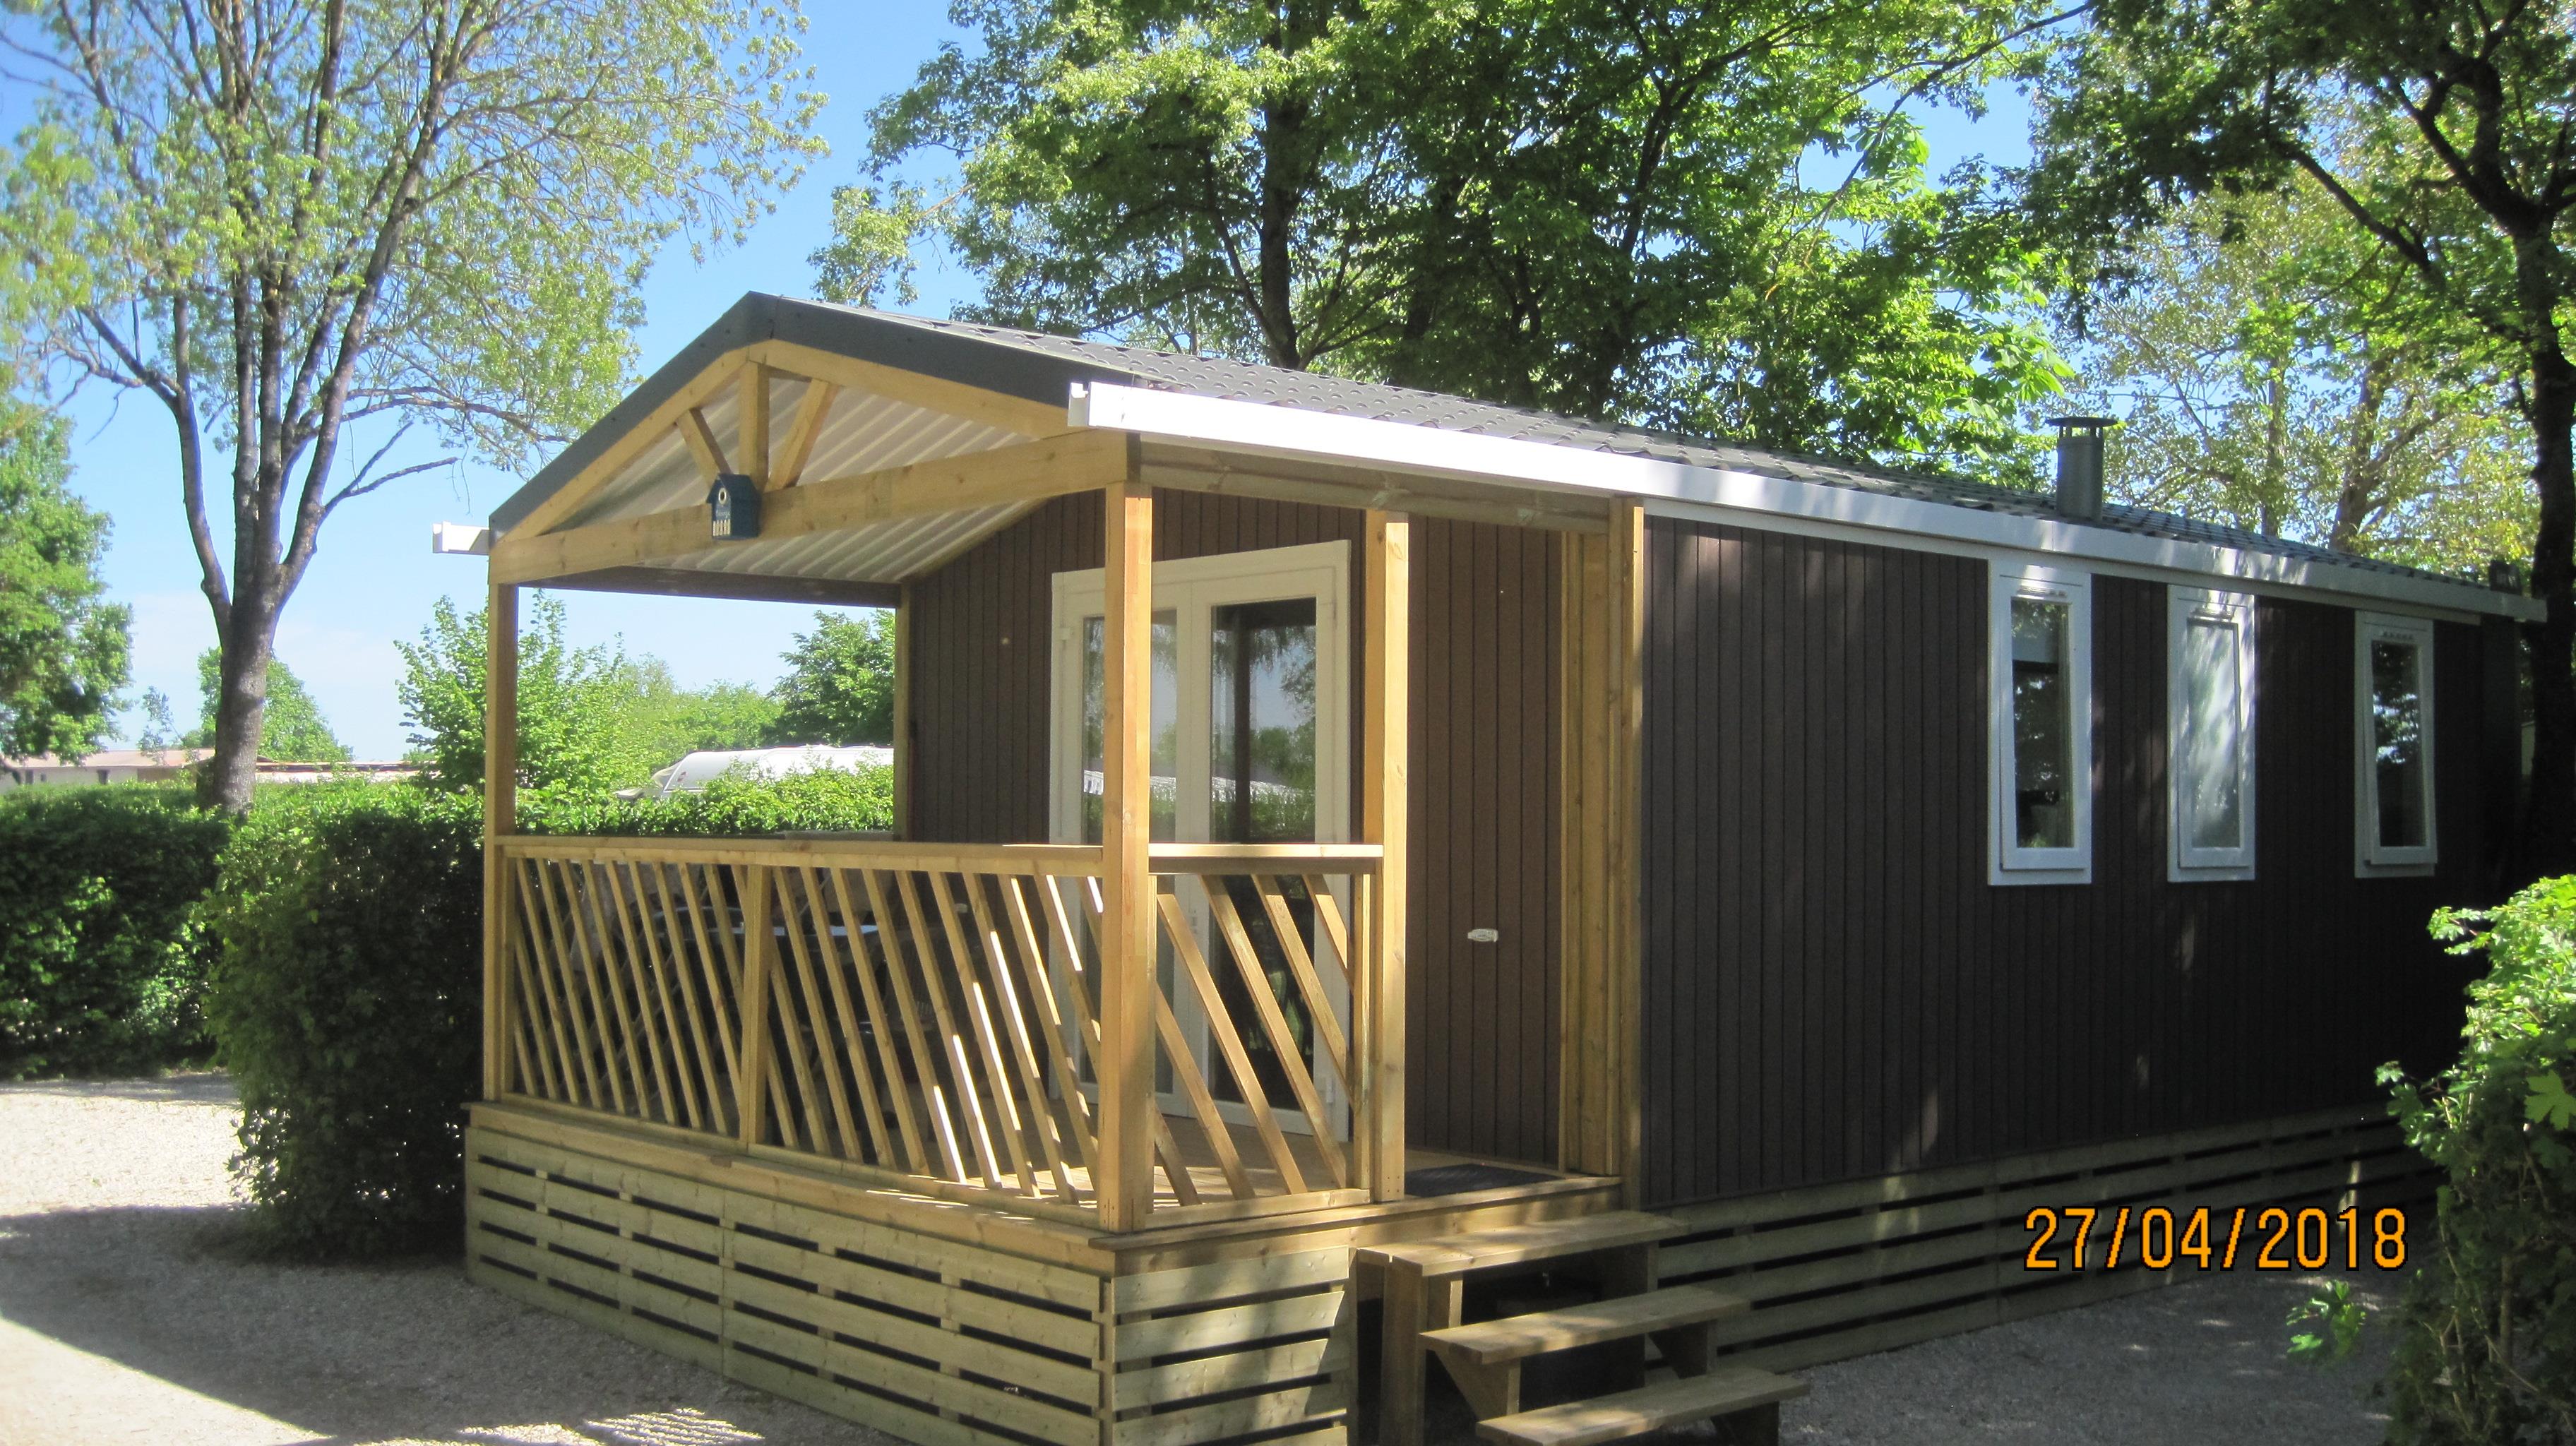 Huuraccommodatie - Loggia Bay - Camping Le Paradis des Dombes